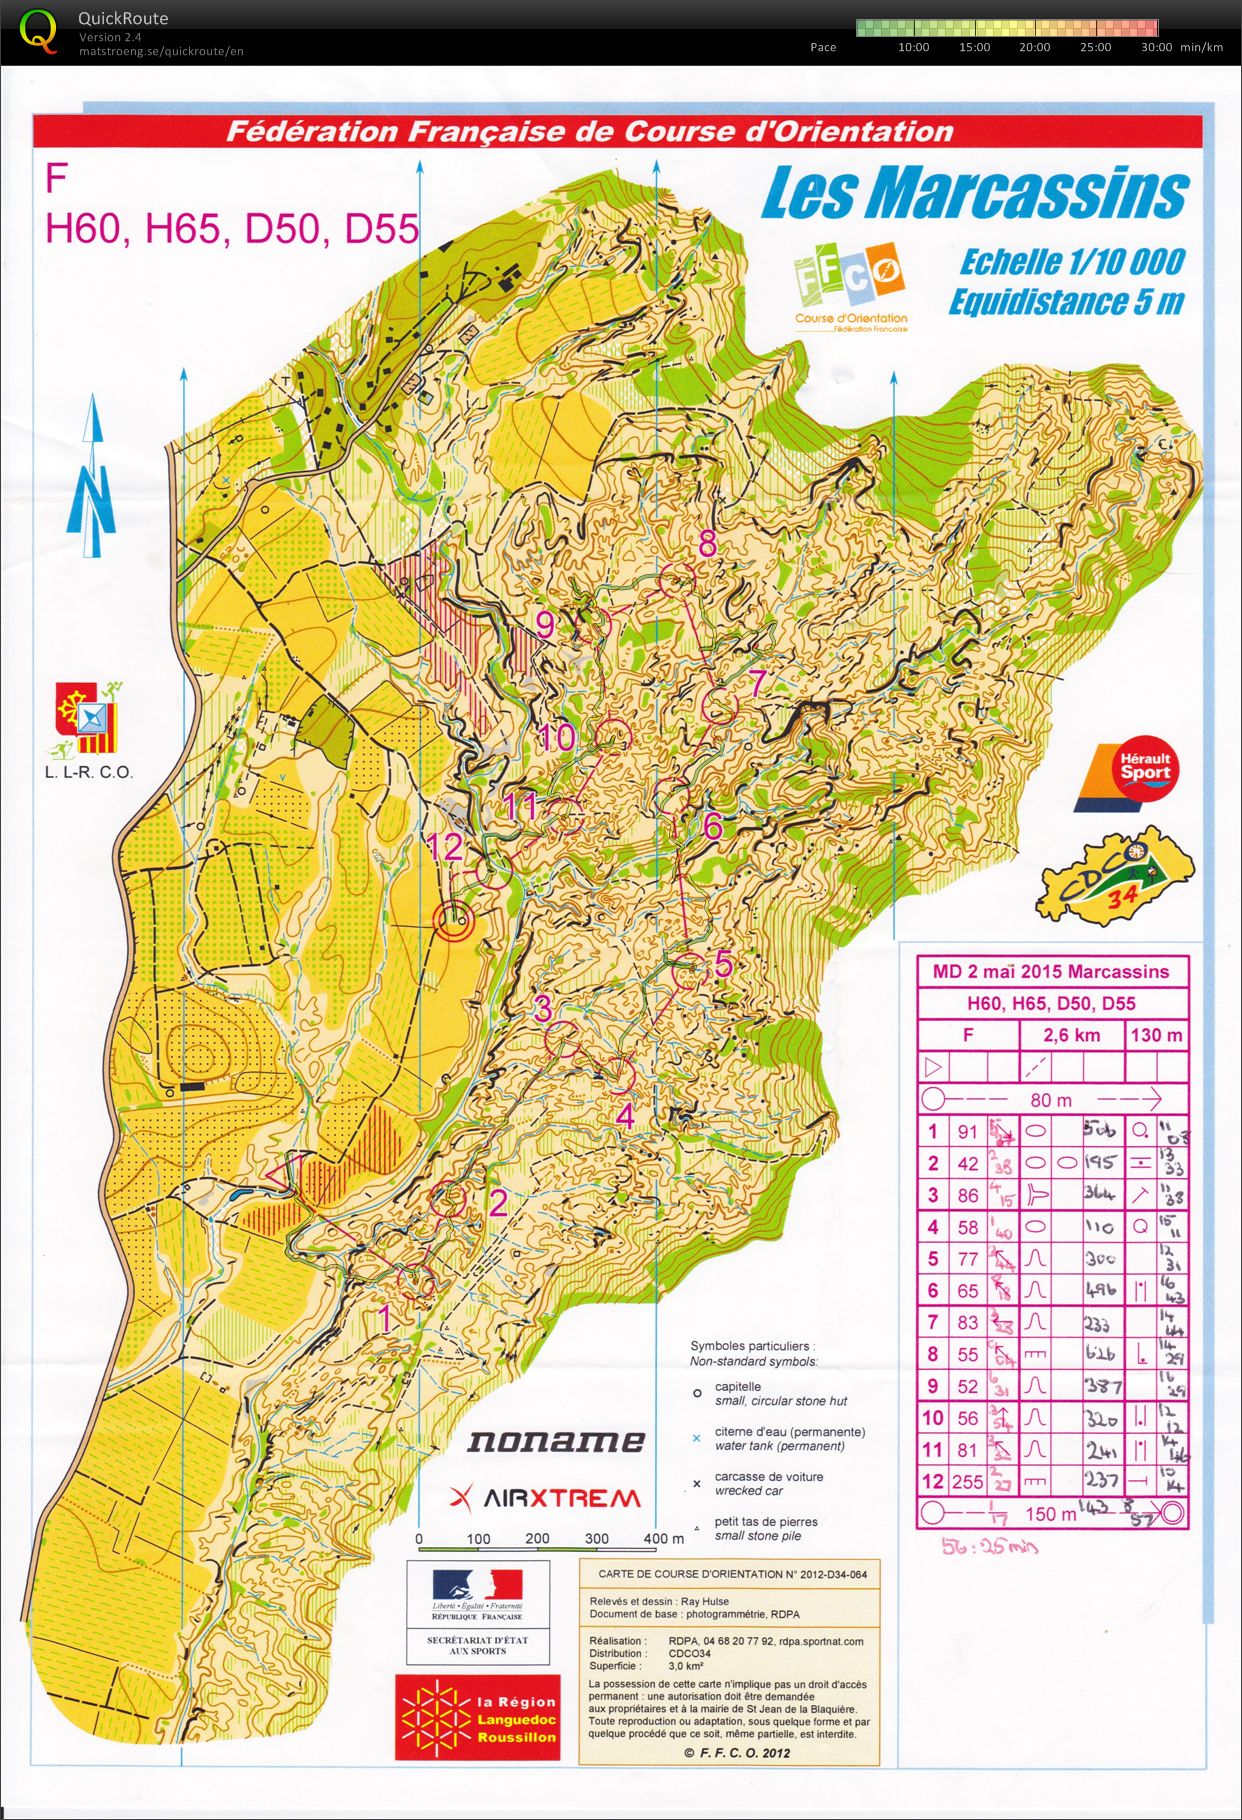 Weekend Nationale Sud-Ouest - Moyenne Distance (02.05.2015)